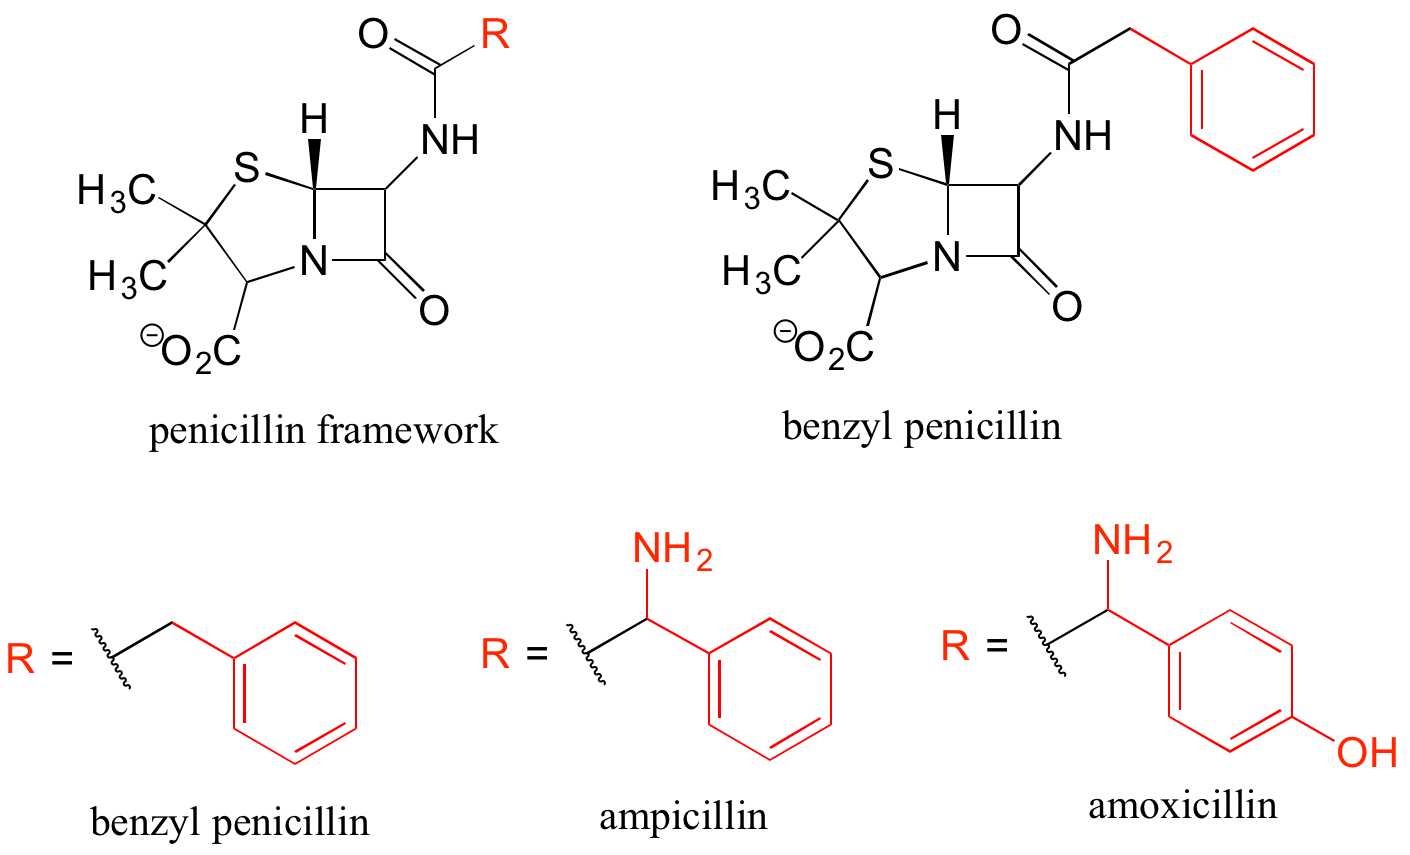 Line-bond structures of (a) the penicillin framework held in common by all members of this family, with R placed in one position, and then specific drawings of the various structures which exist at R for benzyl penicillin, ampicillin, and amoxicillin. Each of these is shown with a break symbol where the R group would be attached to the penicillin framework.